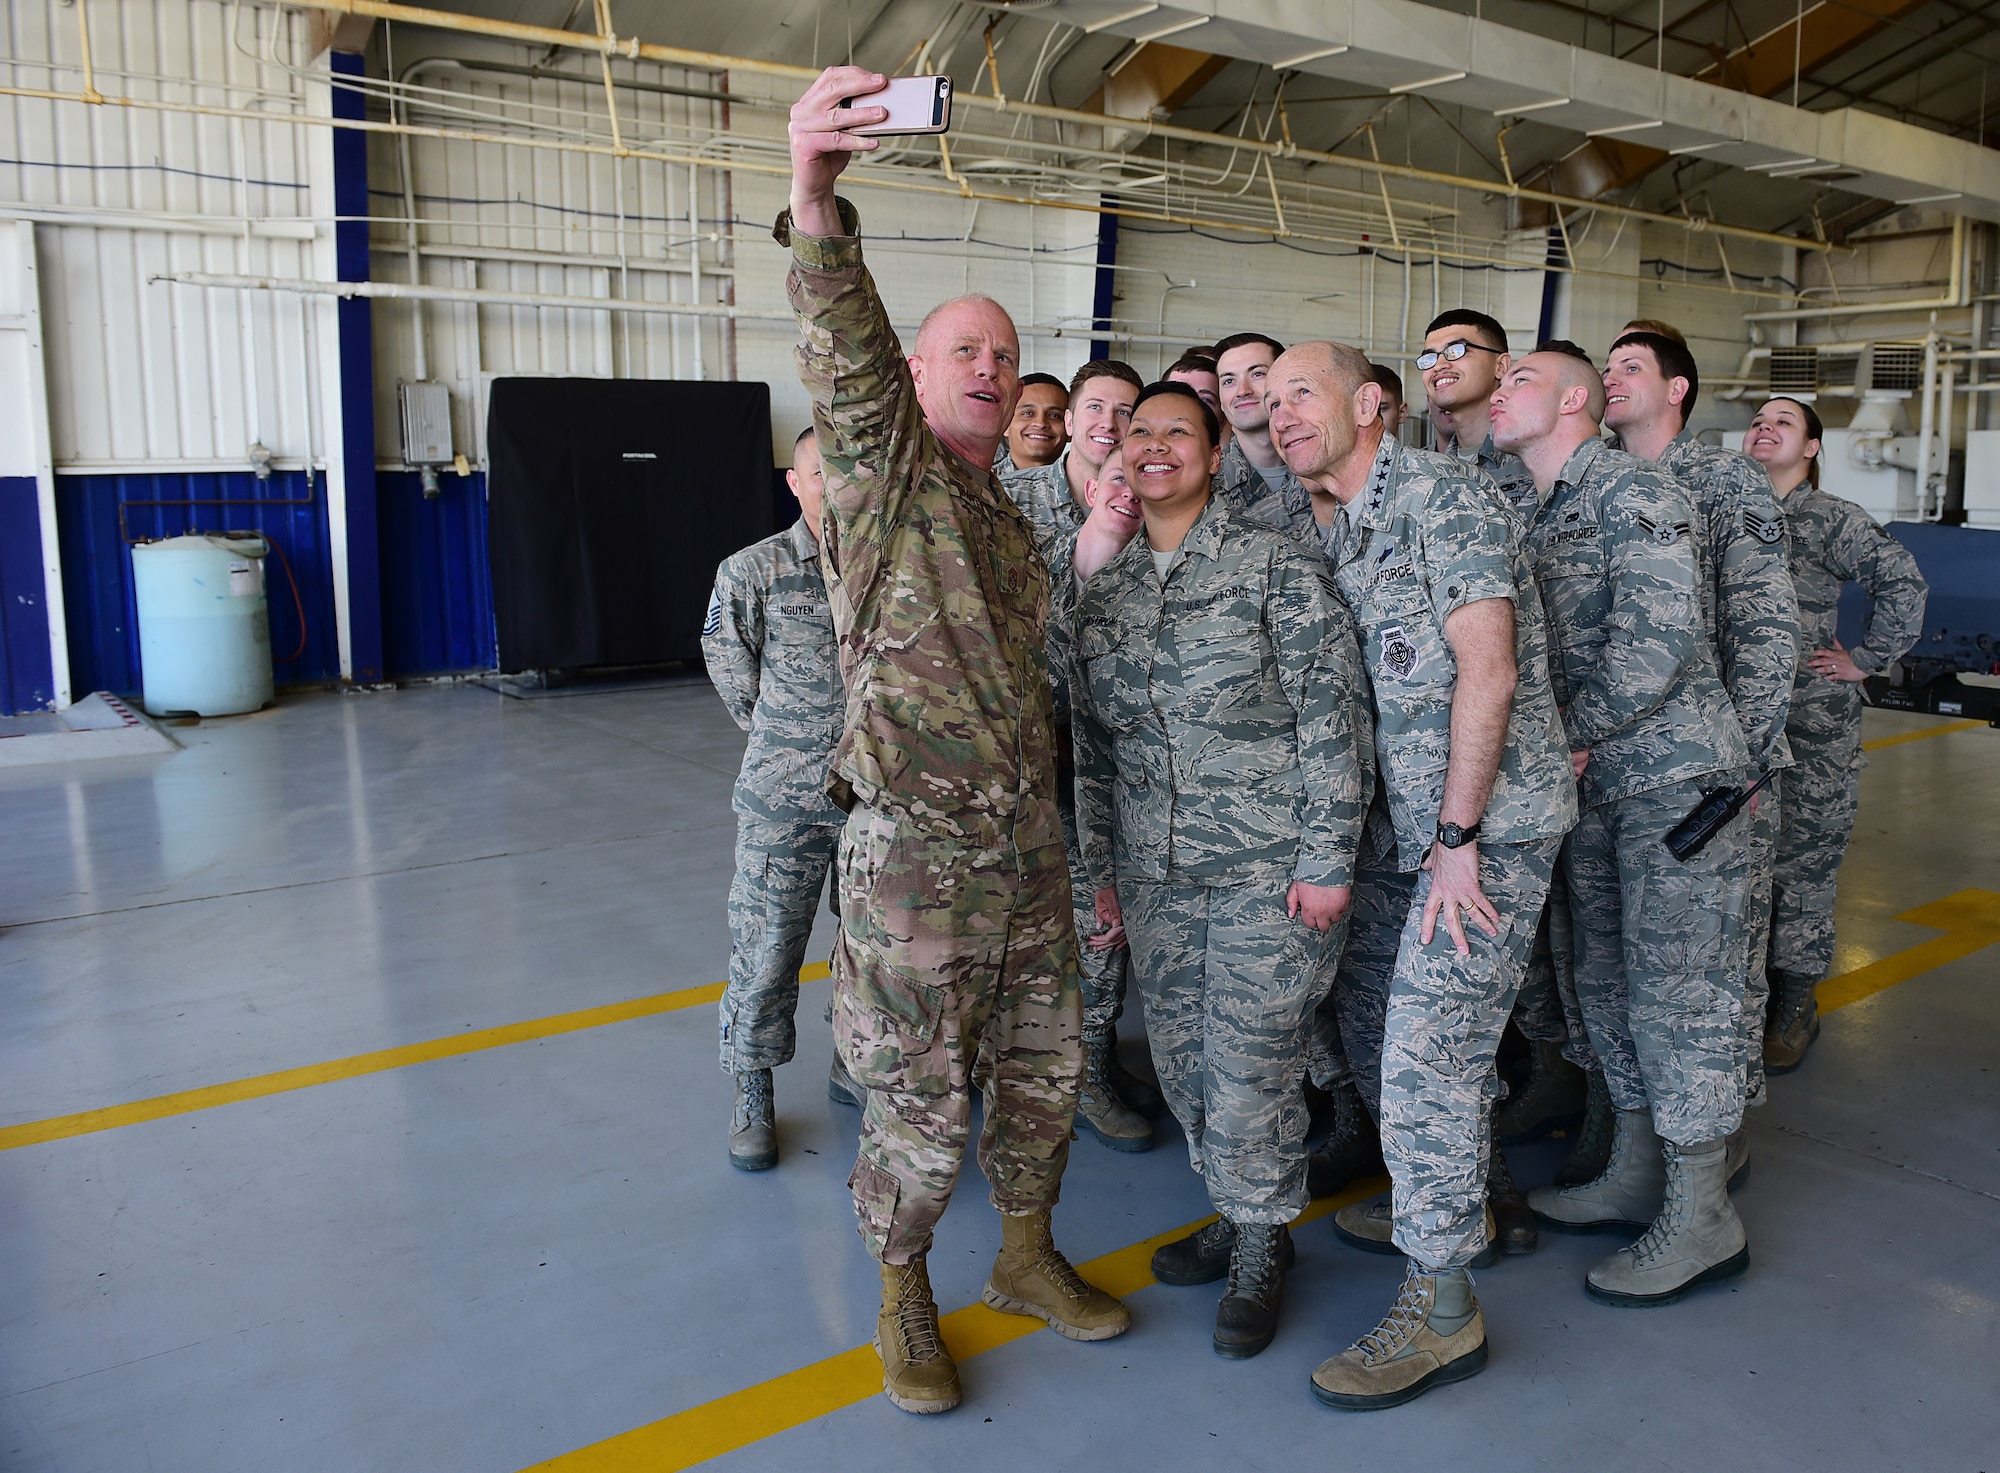 Chief Master Sgt. Frank Batten, command chief of Air Combat Command, holds a phone to take a selfie with Gen. Mike Holmes, commander of ACC, right, and Airmen from the 4th Component Maintenance Squadron, Feb. 26, 2019, at Seymour Johnson Air Force Base, North Carolina. During Holmes’ and Batten’s visit, Airmen shared innovative ideas to help modernize dated practices and find better, more efficient ways of completing the mission across the Air Force. (U.S. Air Force photo by Senior Airman Kenneth Boyton)